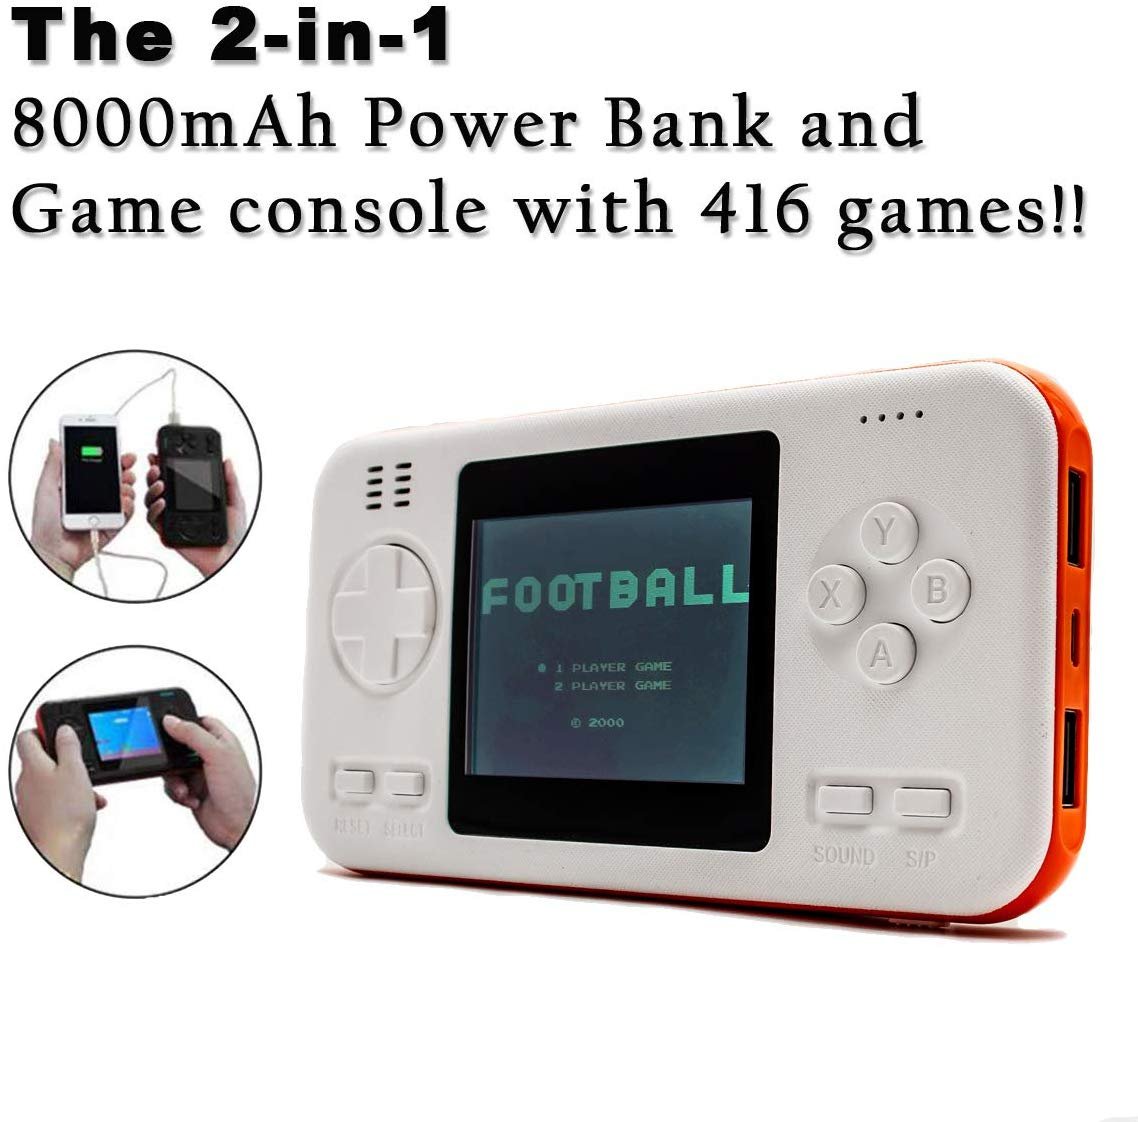 power bank prices at game